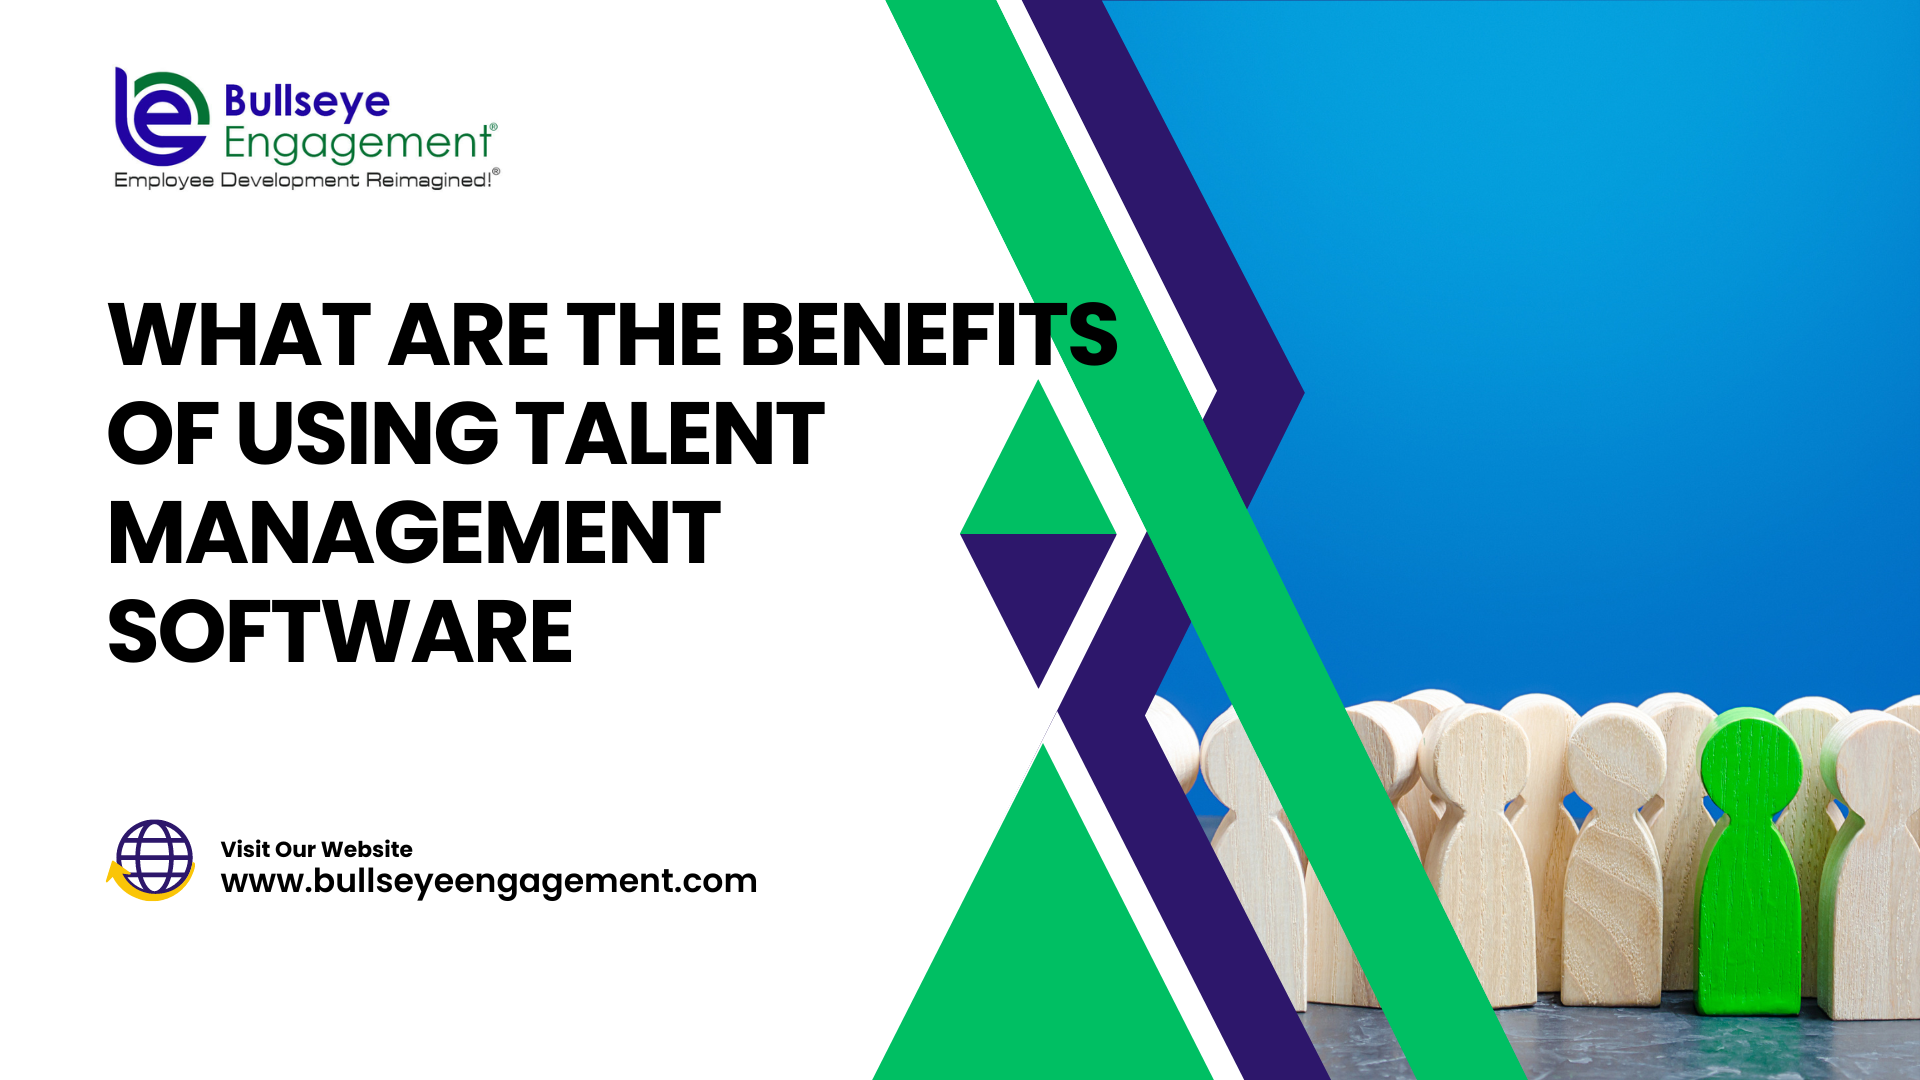 What Are the Benefits of Using Talent Development Software?